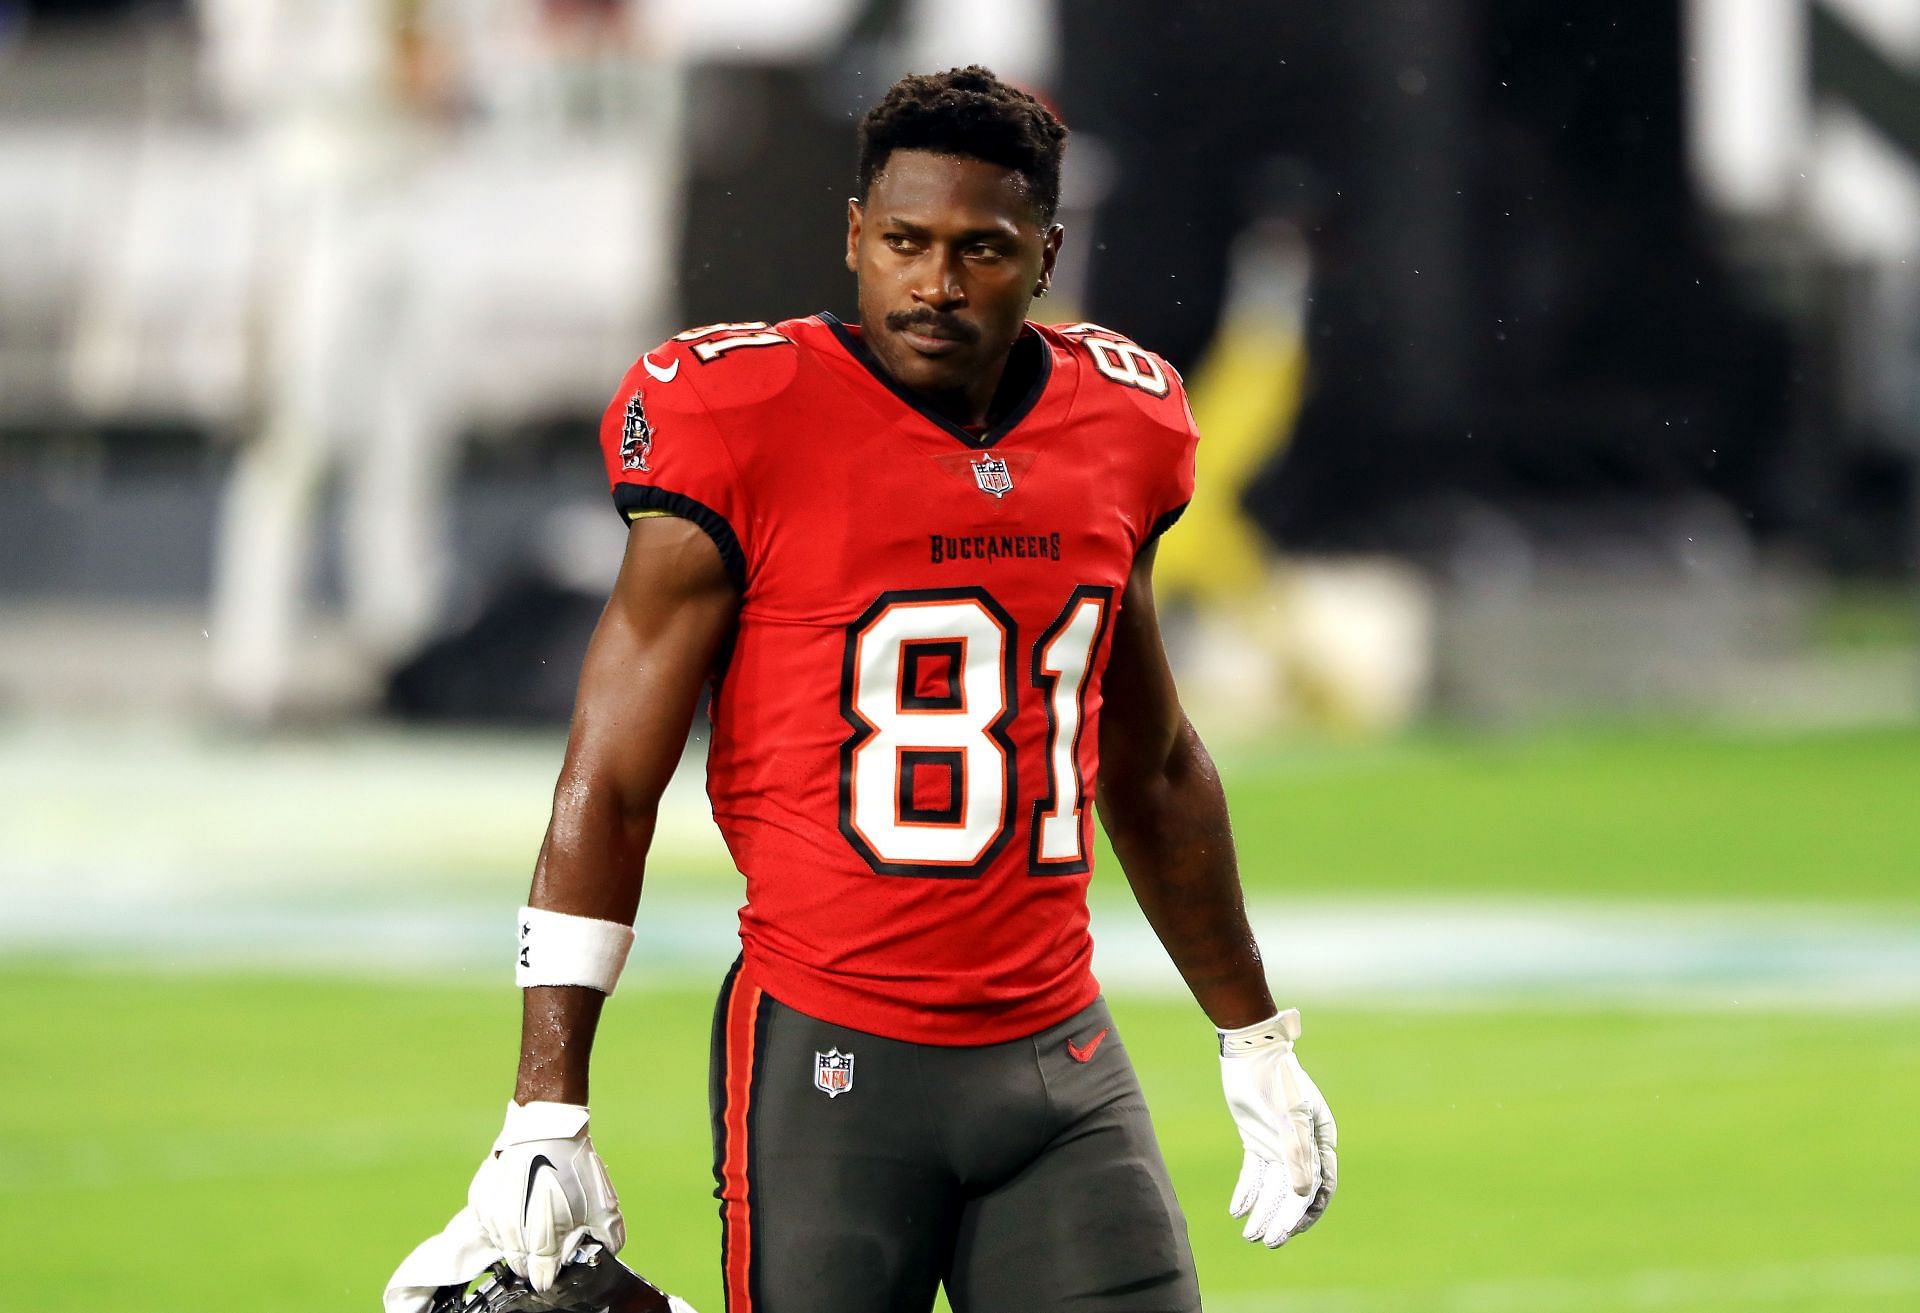 The WR with the Tampa Bay Buccaneers